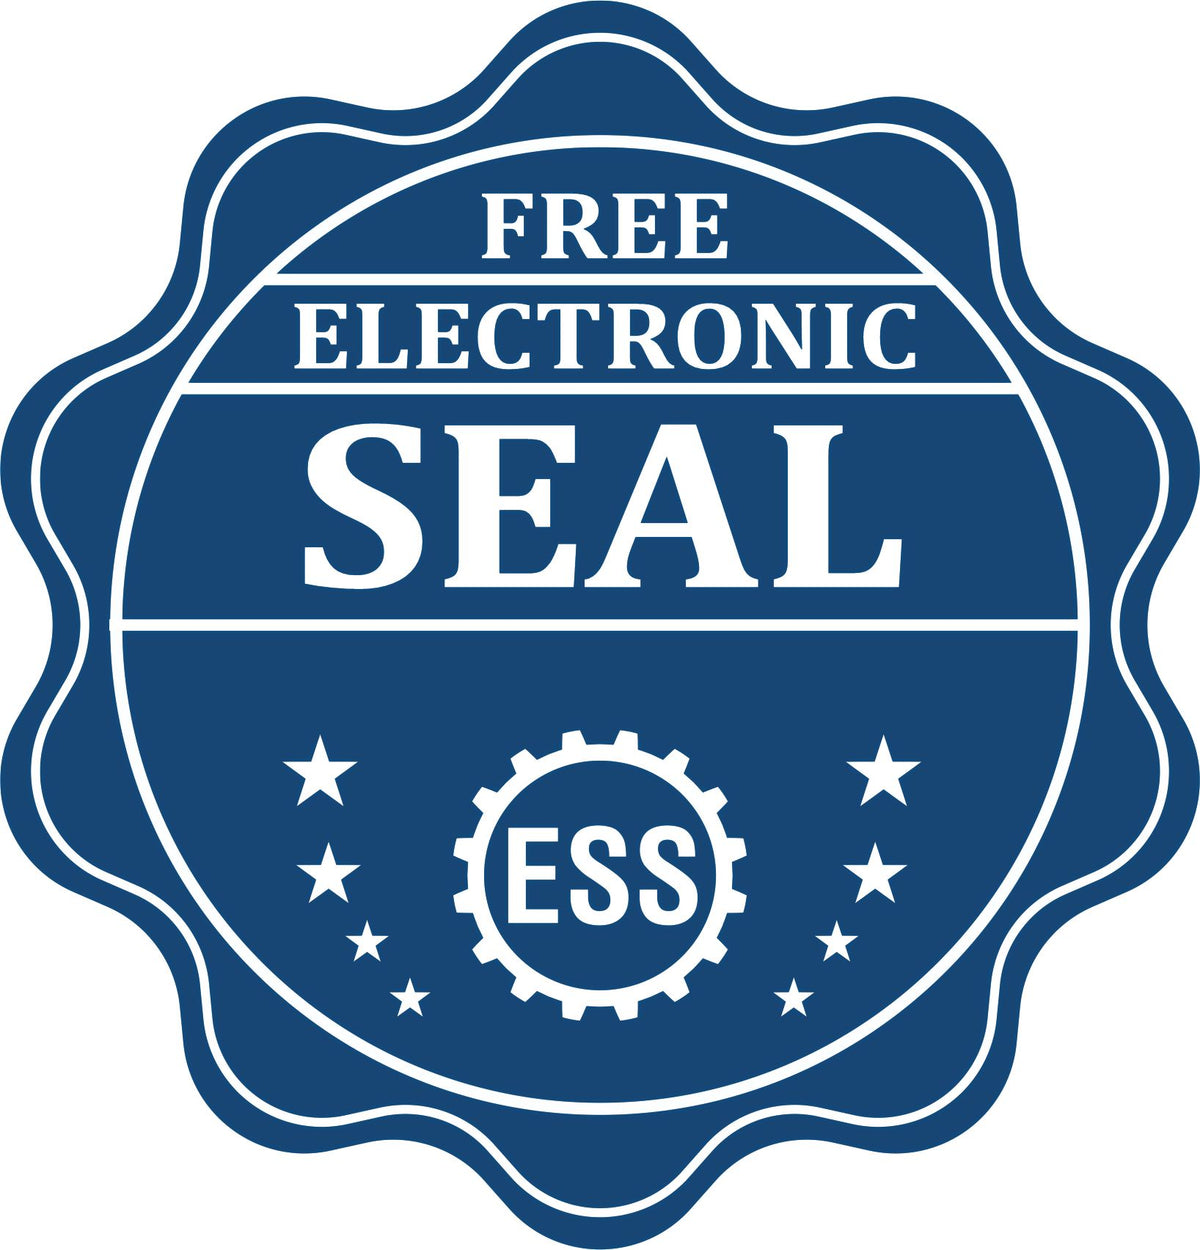 A badge showing a free electronic seal for the Gift New Mexico Geologist Seal with stars and the ESS gear on the emblem.